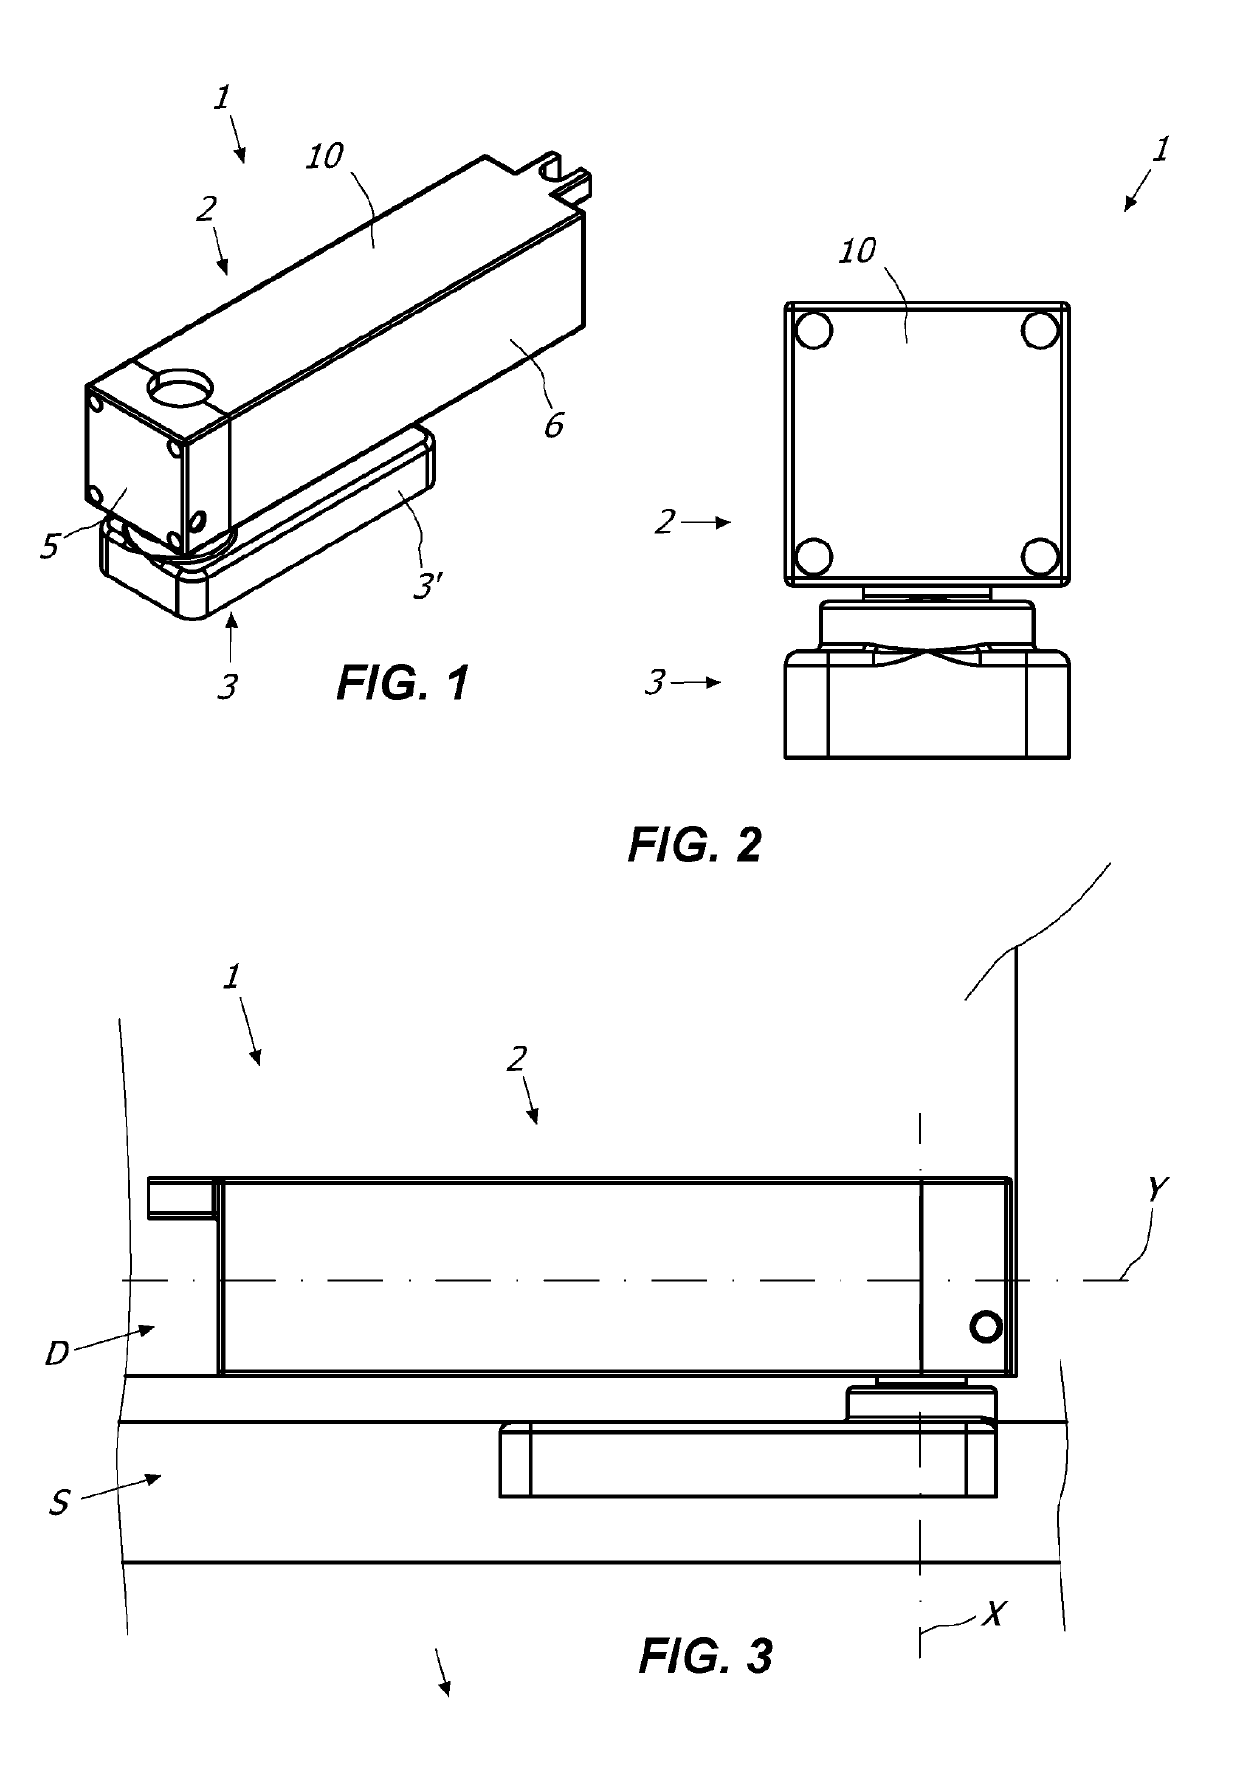 Hinge for the rotatable movement of a door, a shutter or the like